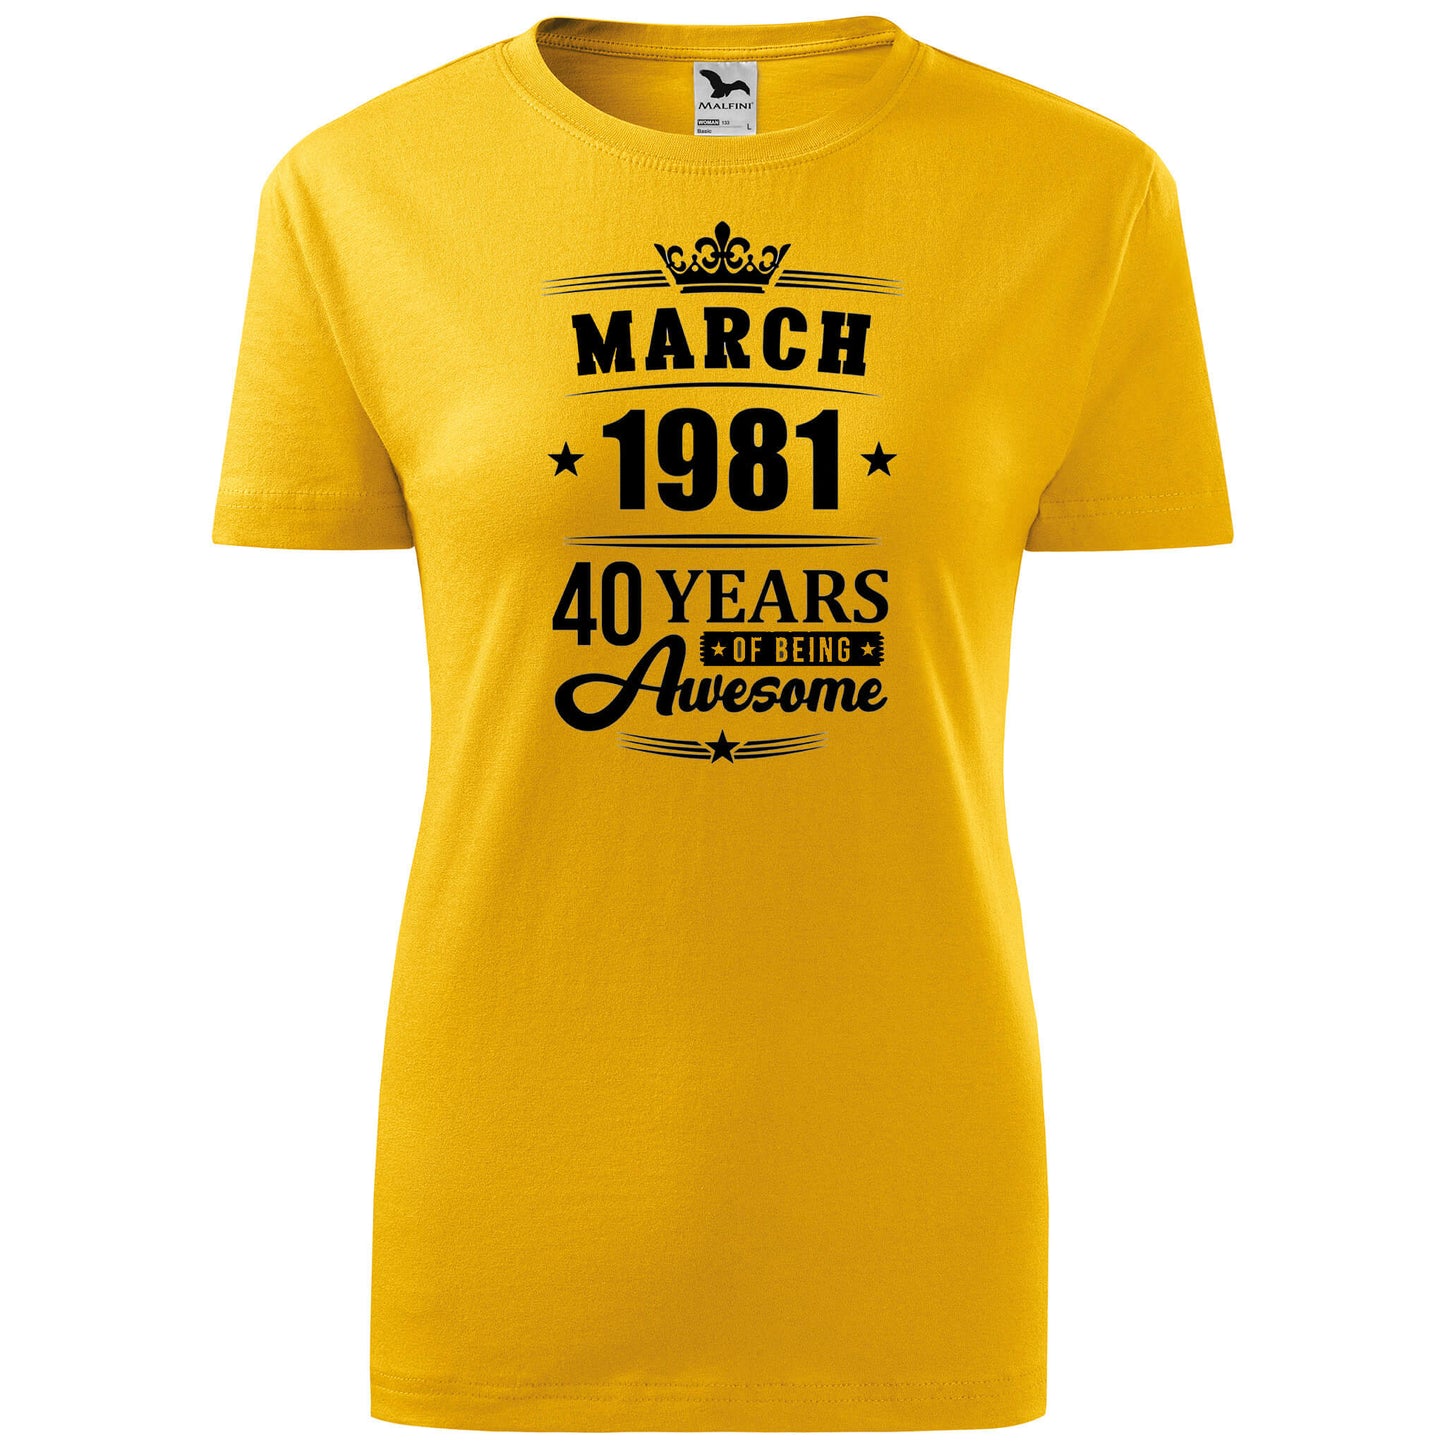 T-shirt - March 1981 - 41 years of being awesome - Customizable - rvdesignprint